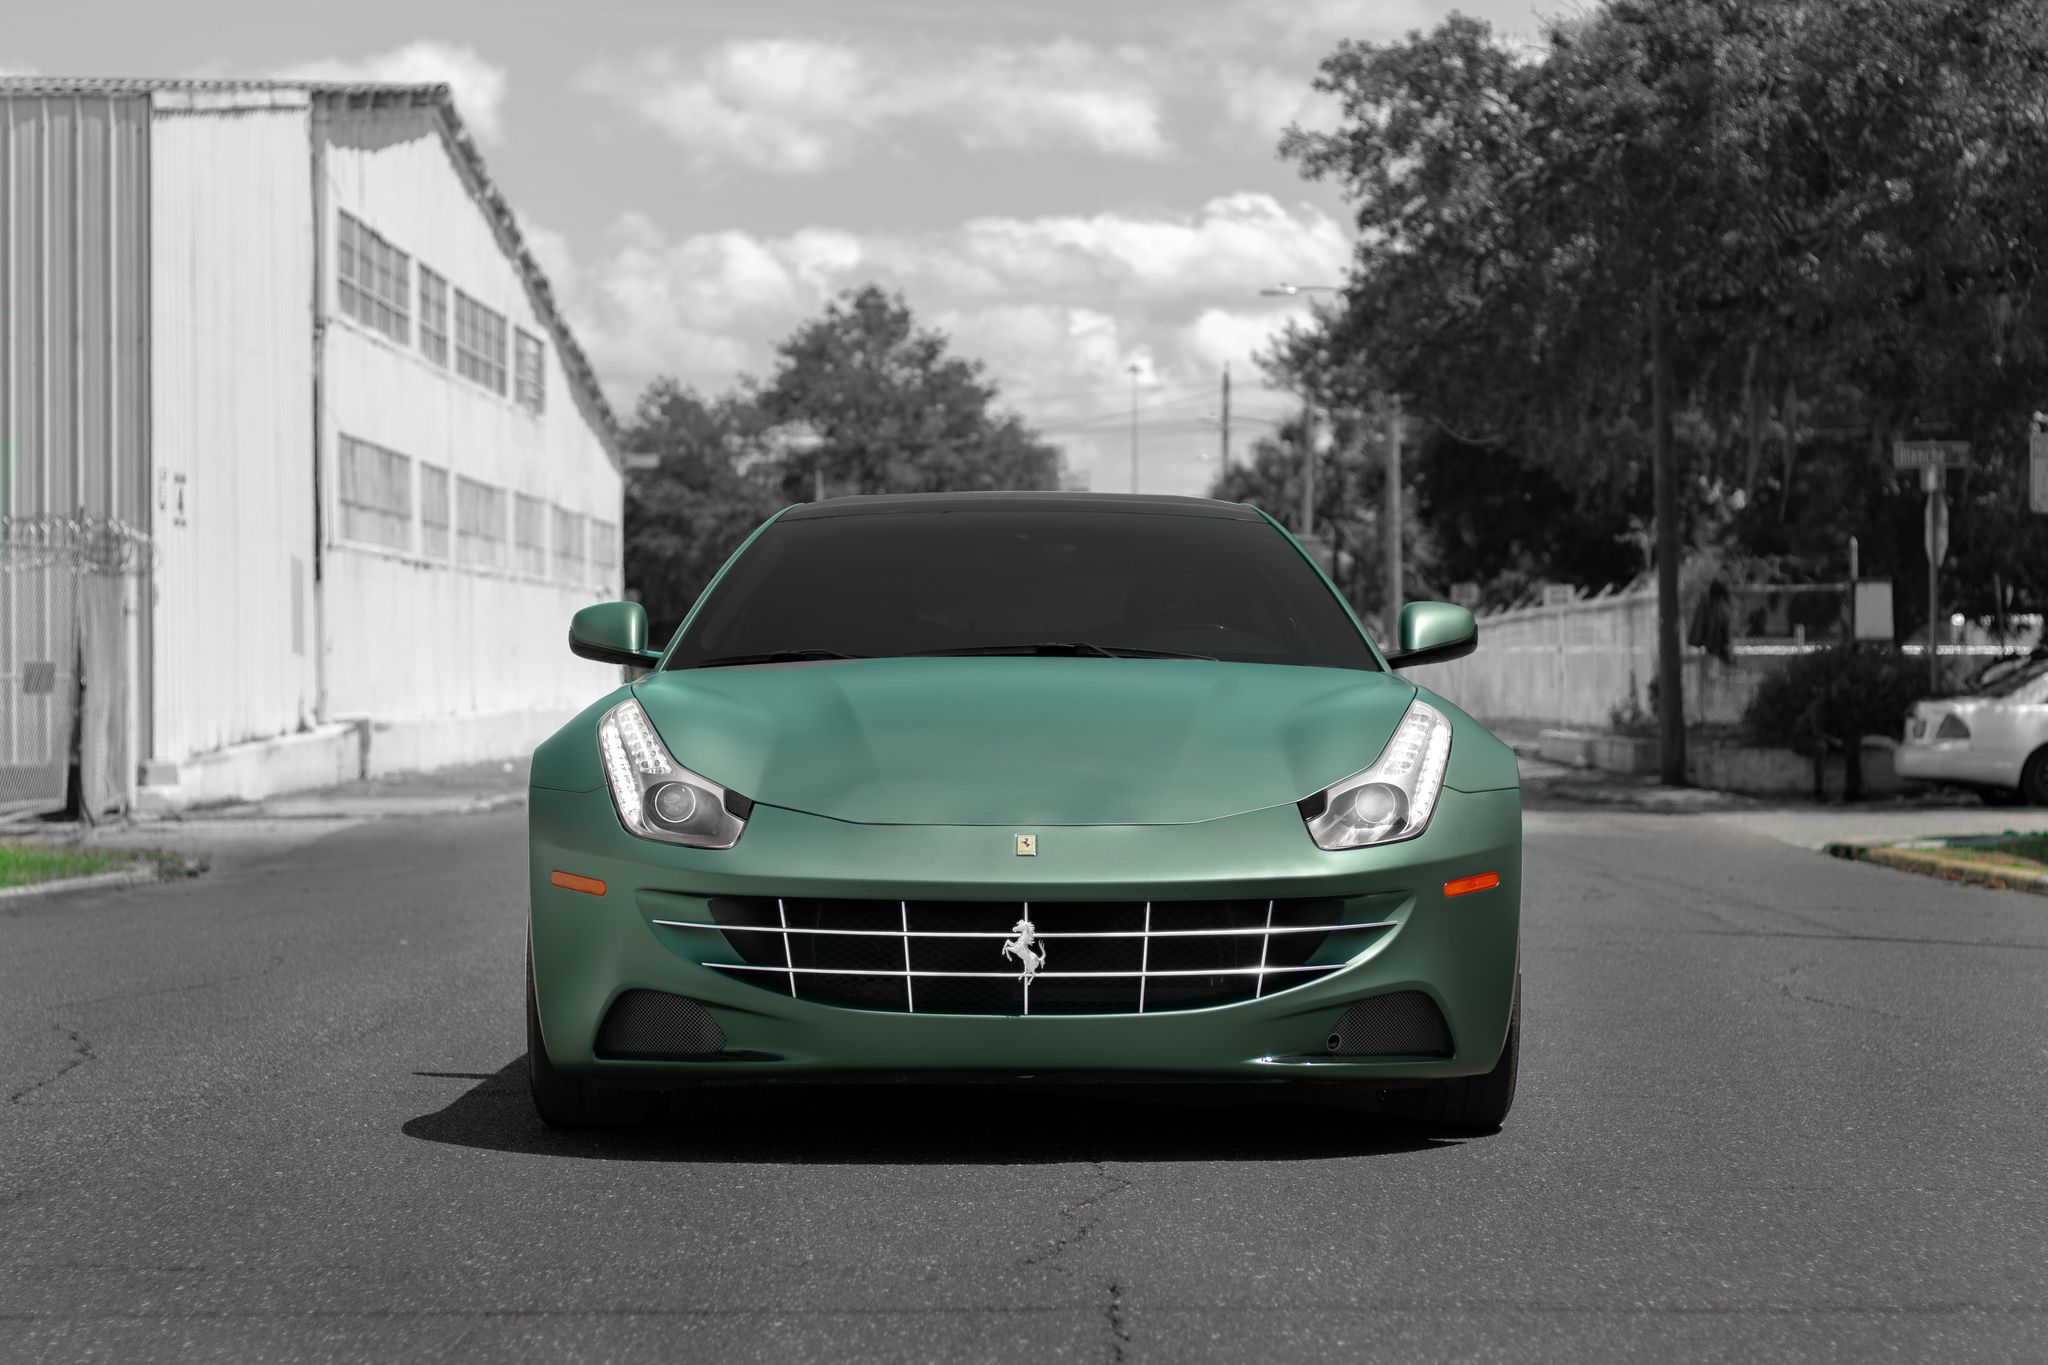 Front of Ferrari car model wrapped in a light Matte Green colored vinyl car wrap. Smoothest "Matte Green" Ferrari wrapped by the vinyl car wrap experts at <a href="http://www.wrapsdirect.com">Wraps Direct</a> in Jacksonville Florida.